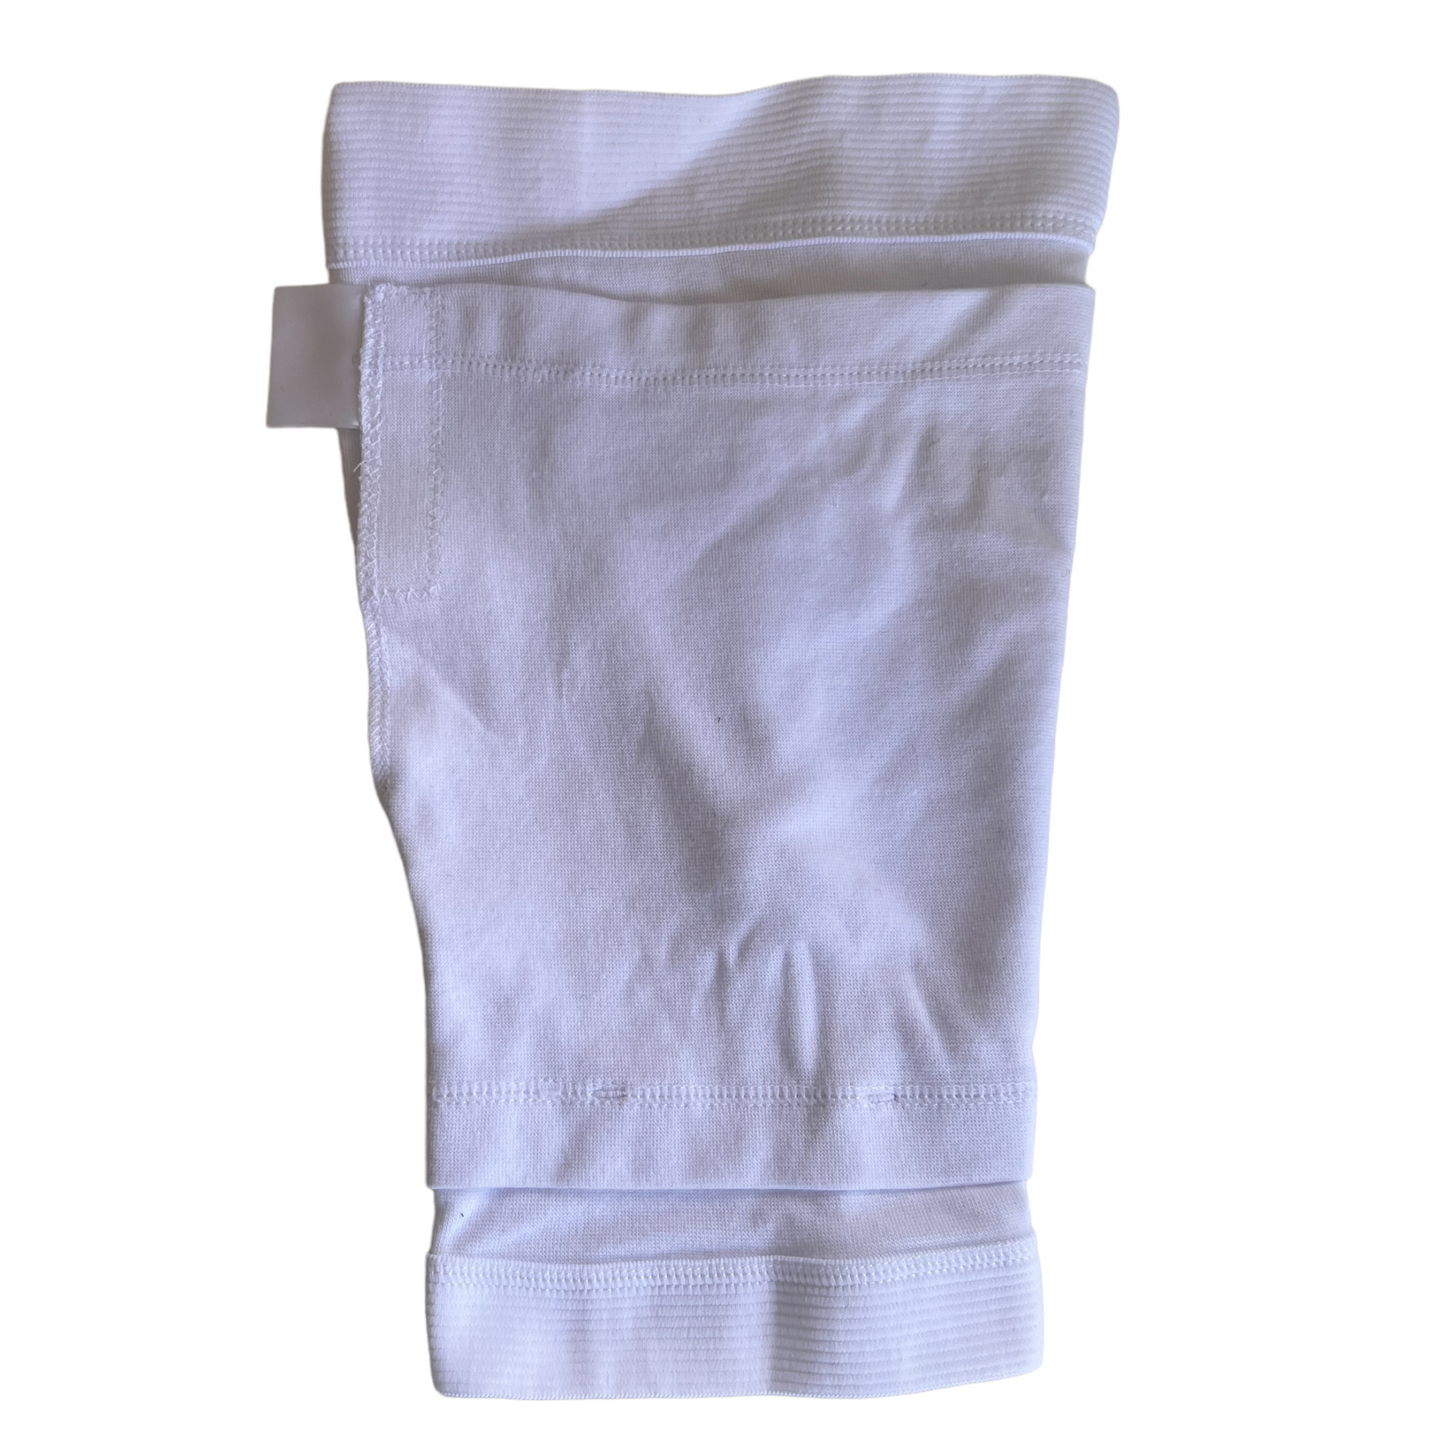 ❤️📸 Compression Sleeve — For Catheter Bag Incontinence Aids SPIRIT SPARKPLUGS   